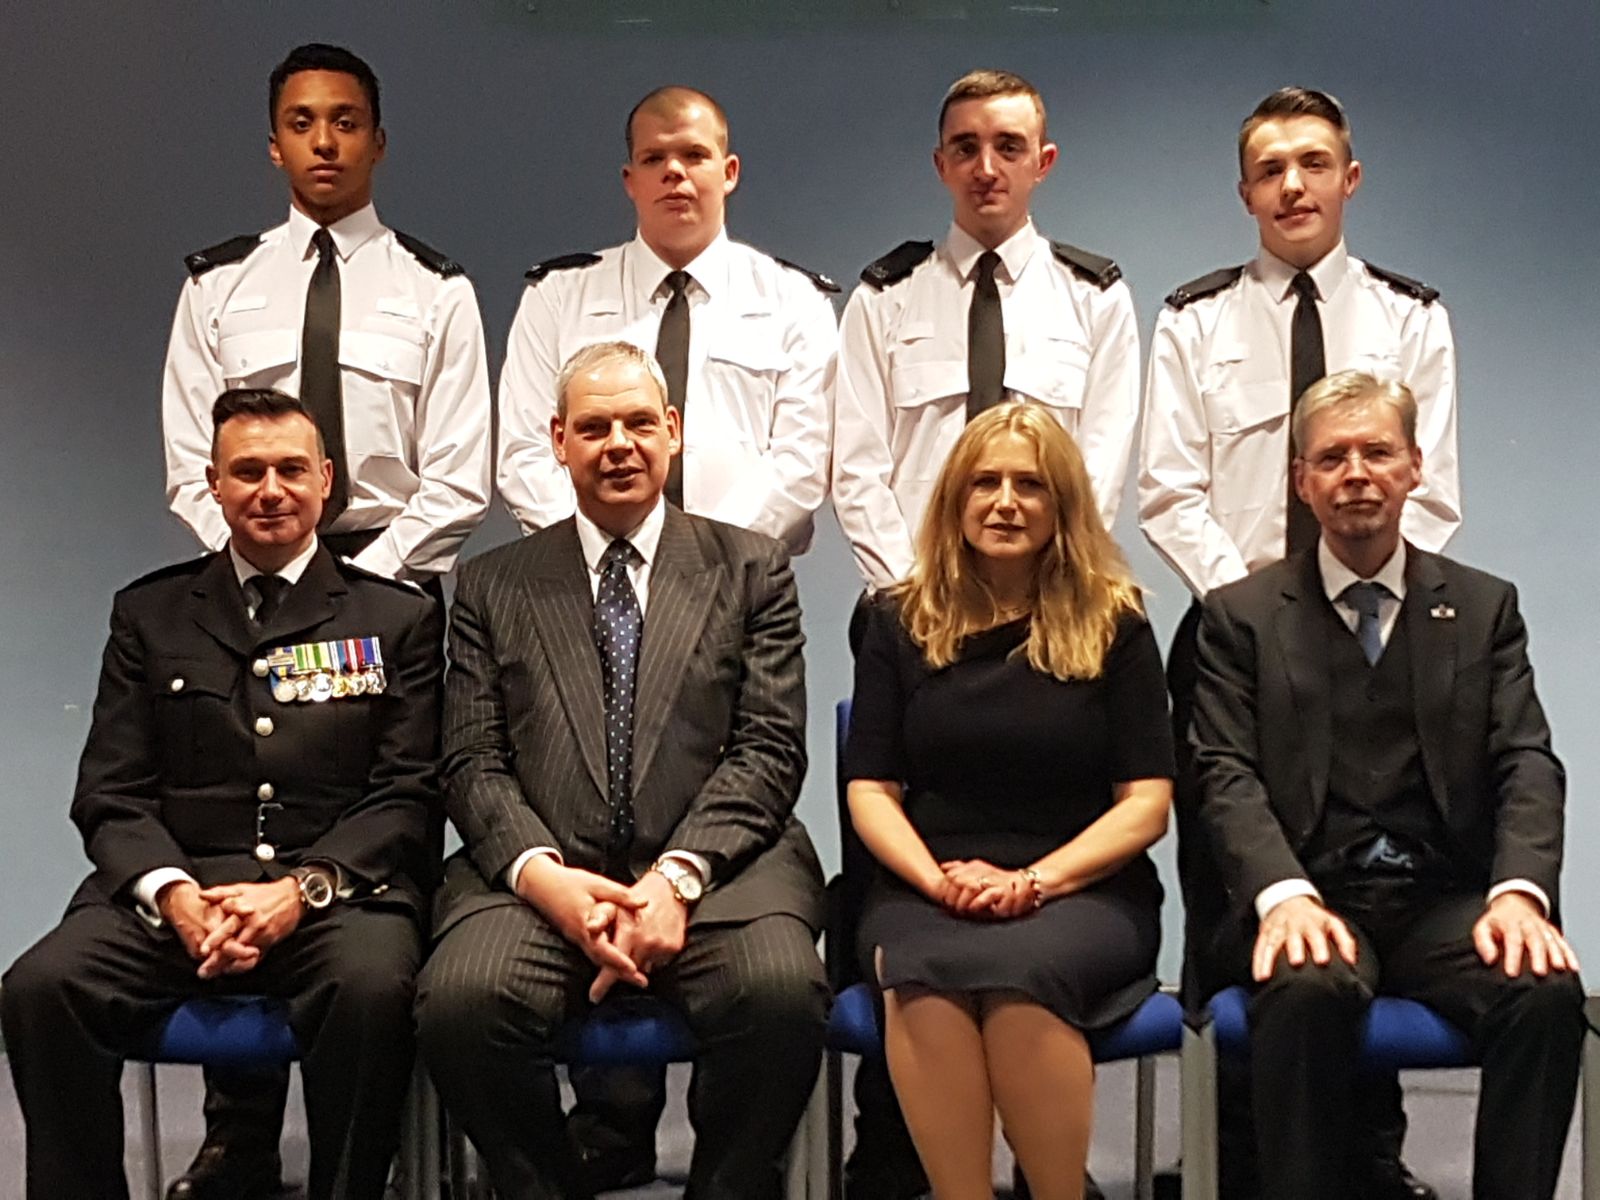 Special constables join the ranks in Watford and St Albans